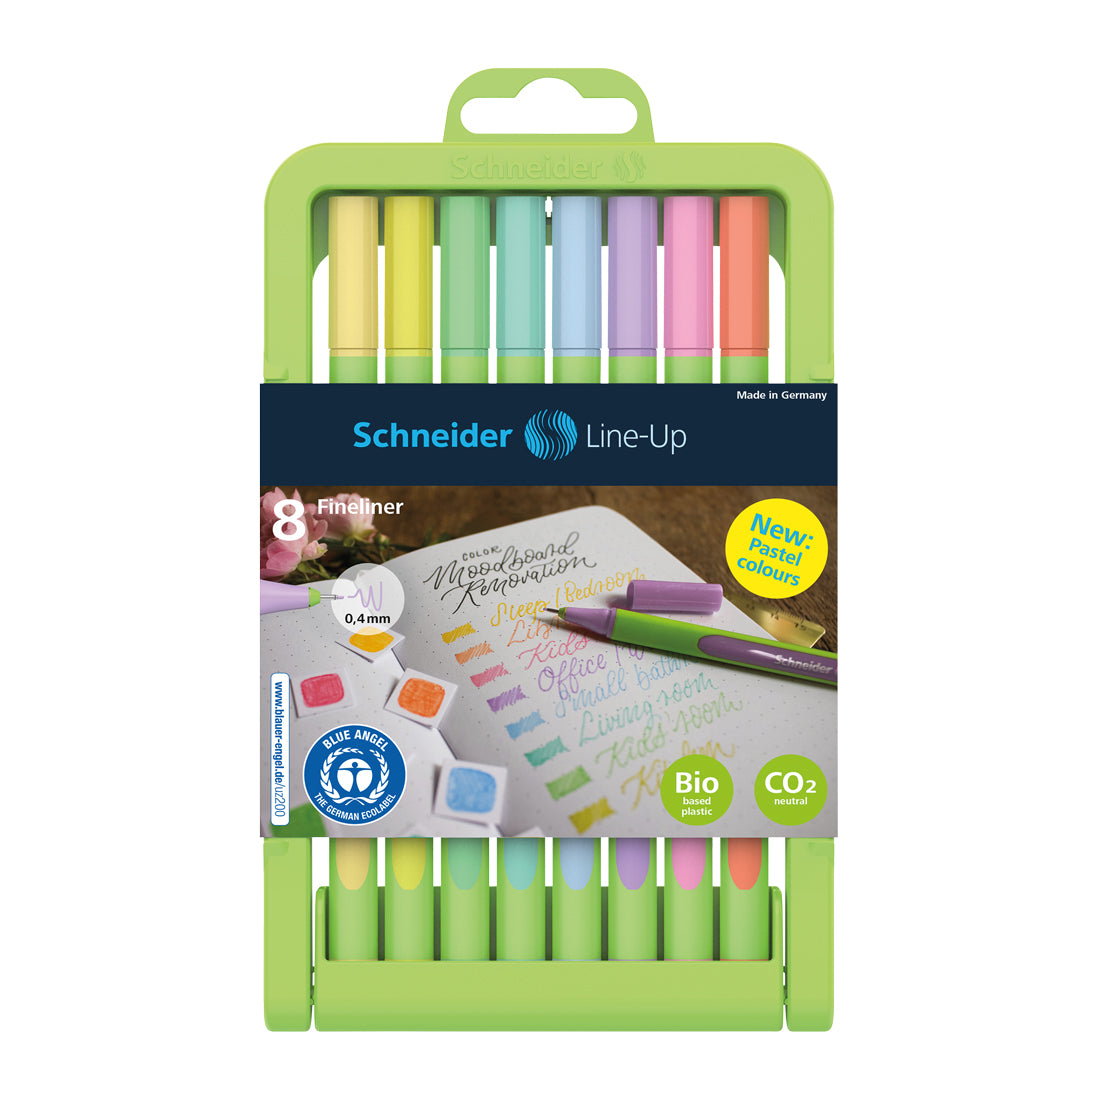 Line-Up Pastel Fineliner 0.4mm with Case stand, 8 pieces